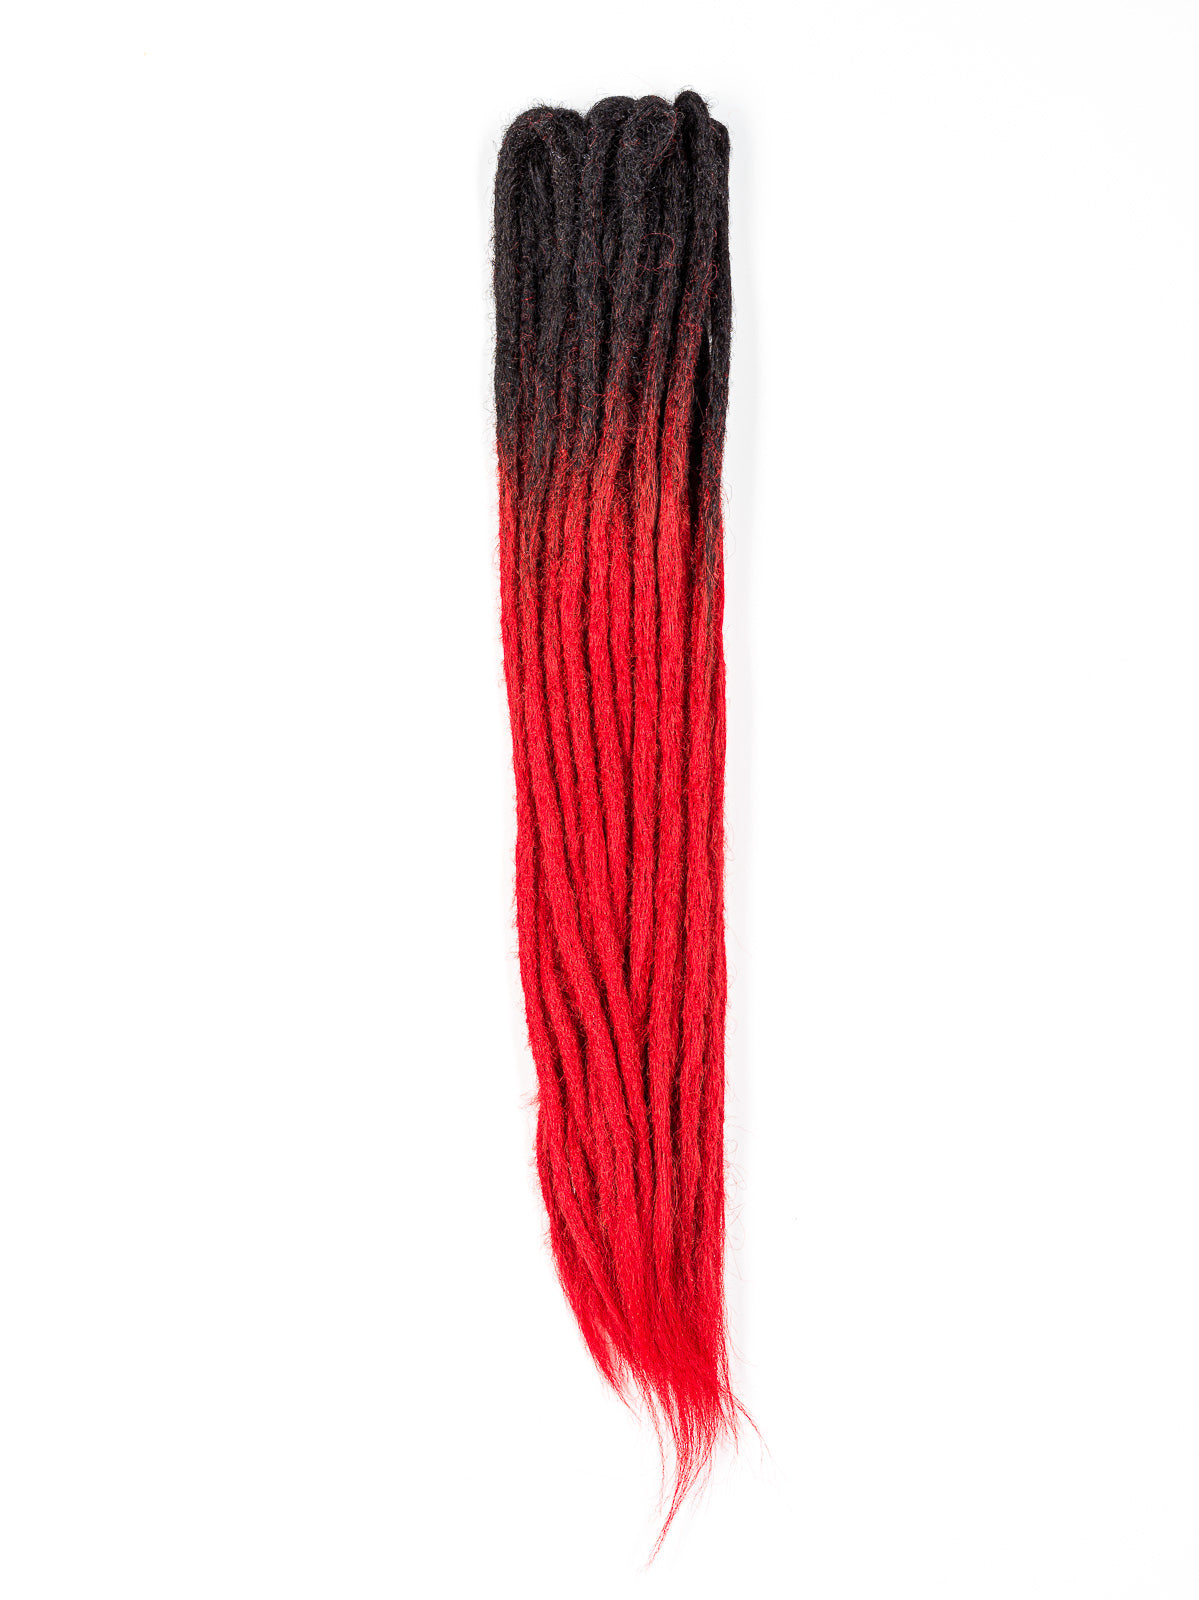 DreadLab - Double Ended Synthetic Dreadlocks (Pack of 10) Ombre Crochet Extensions Black Red